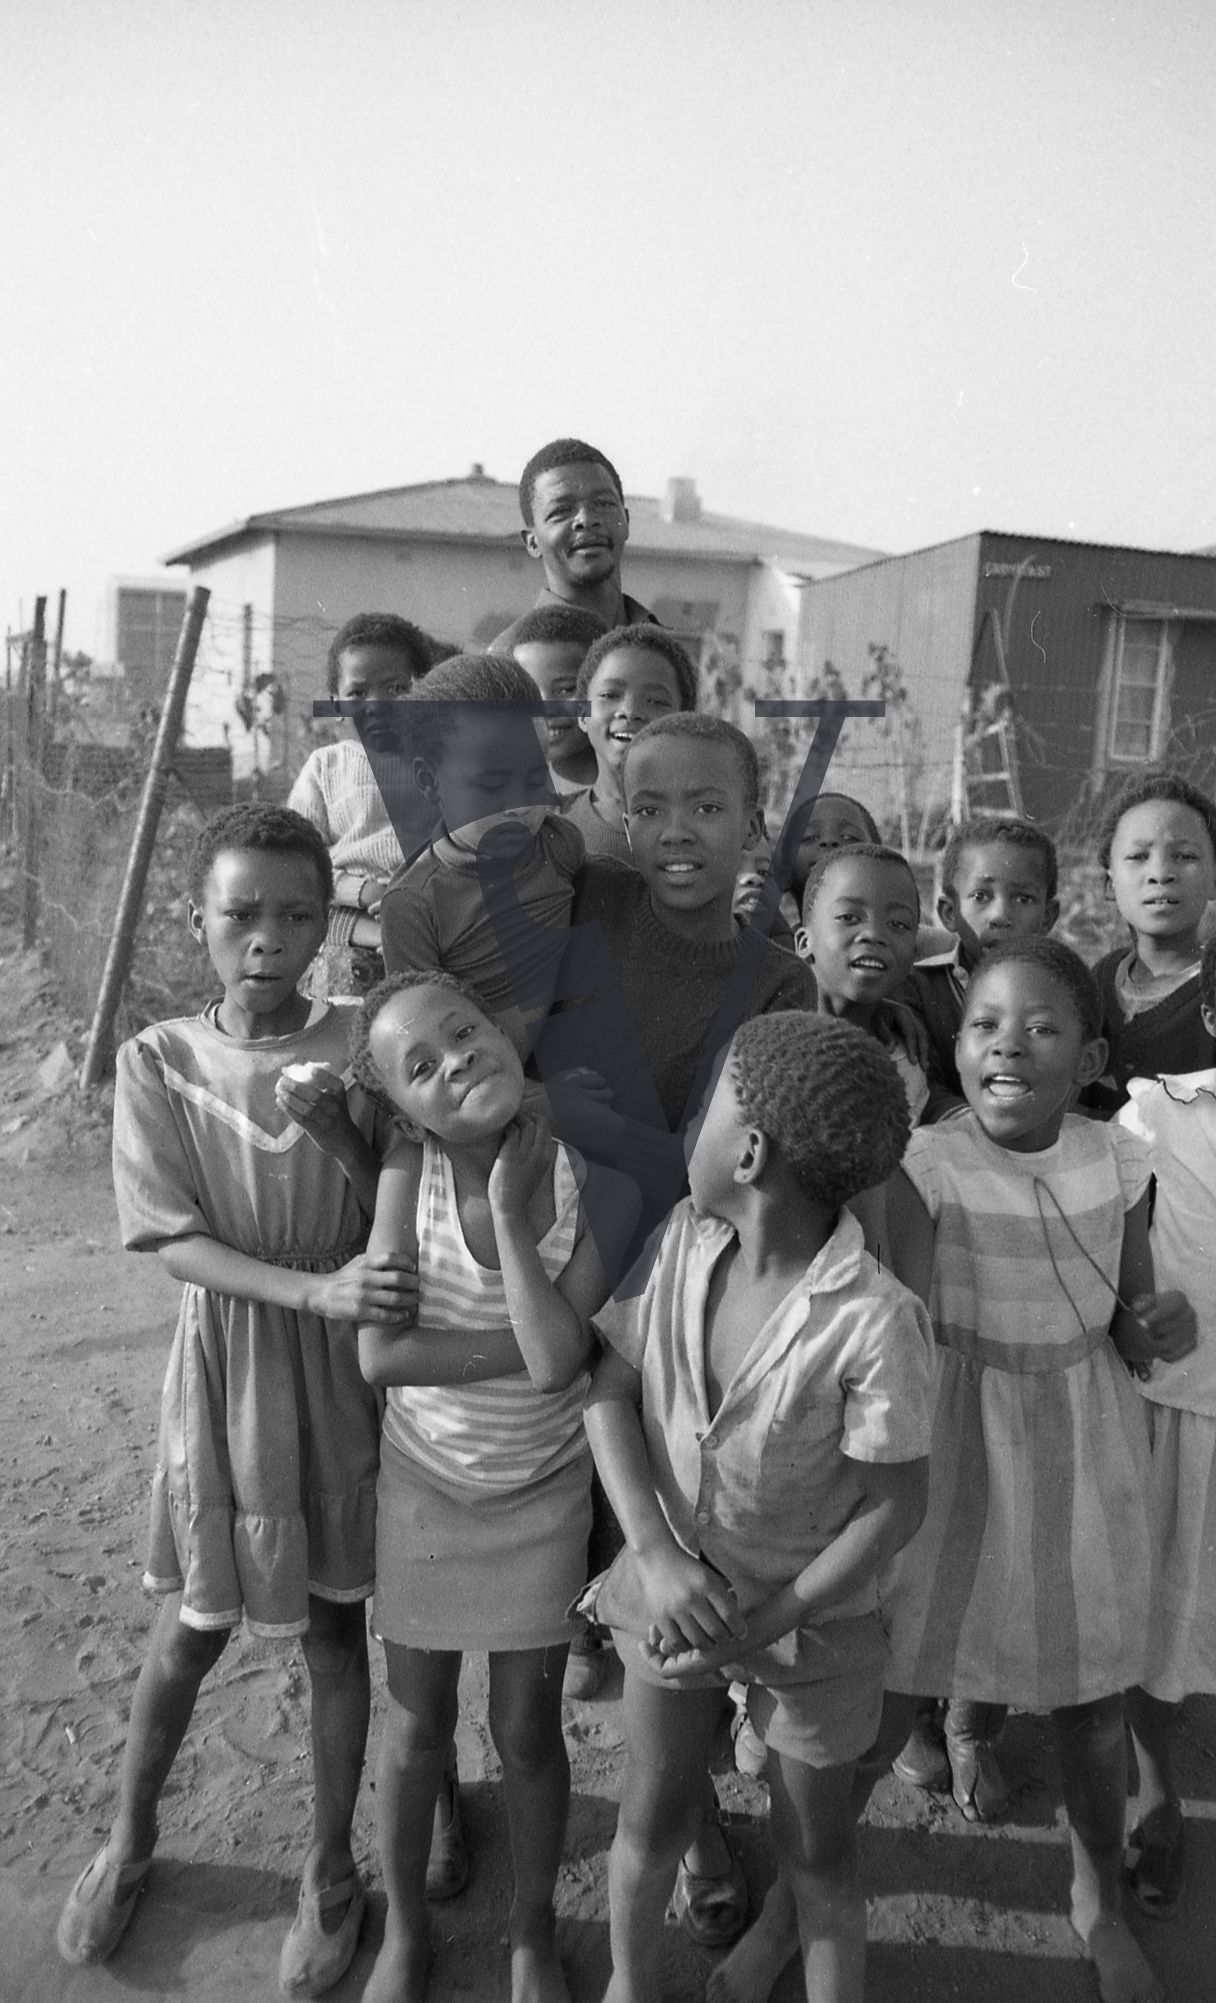 South Africa, township, man, children, group, smiling, portrait.